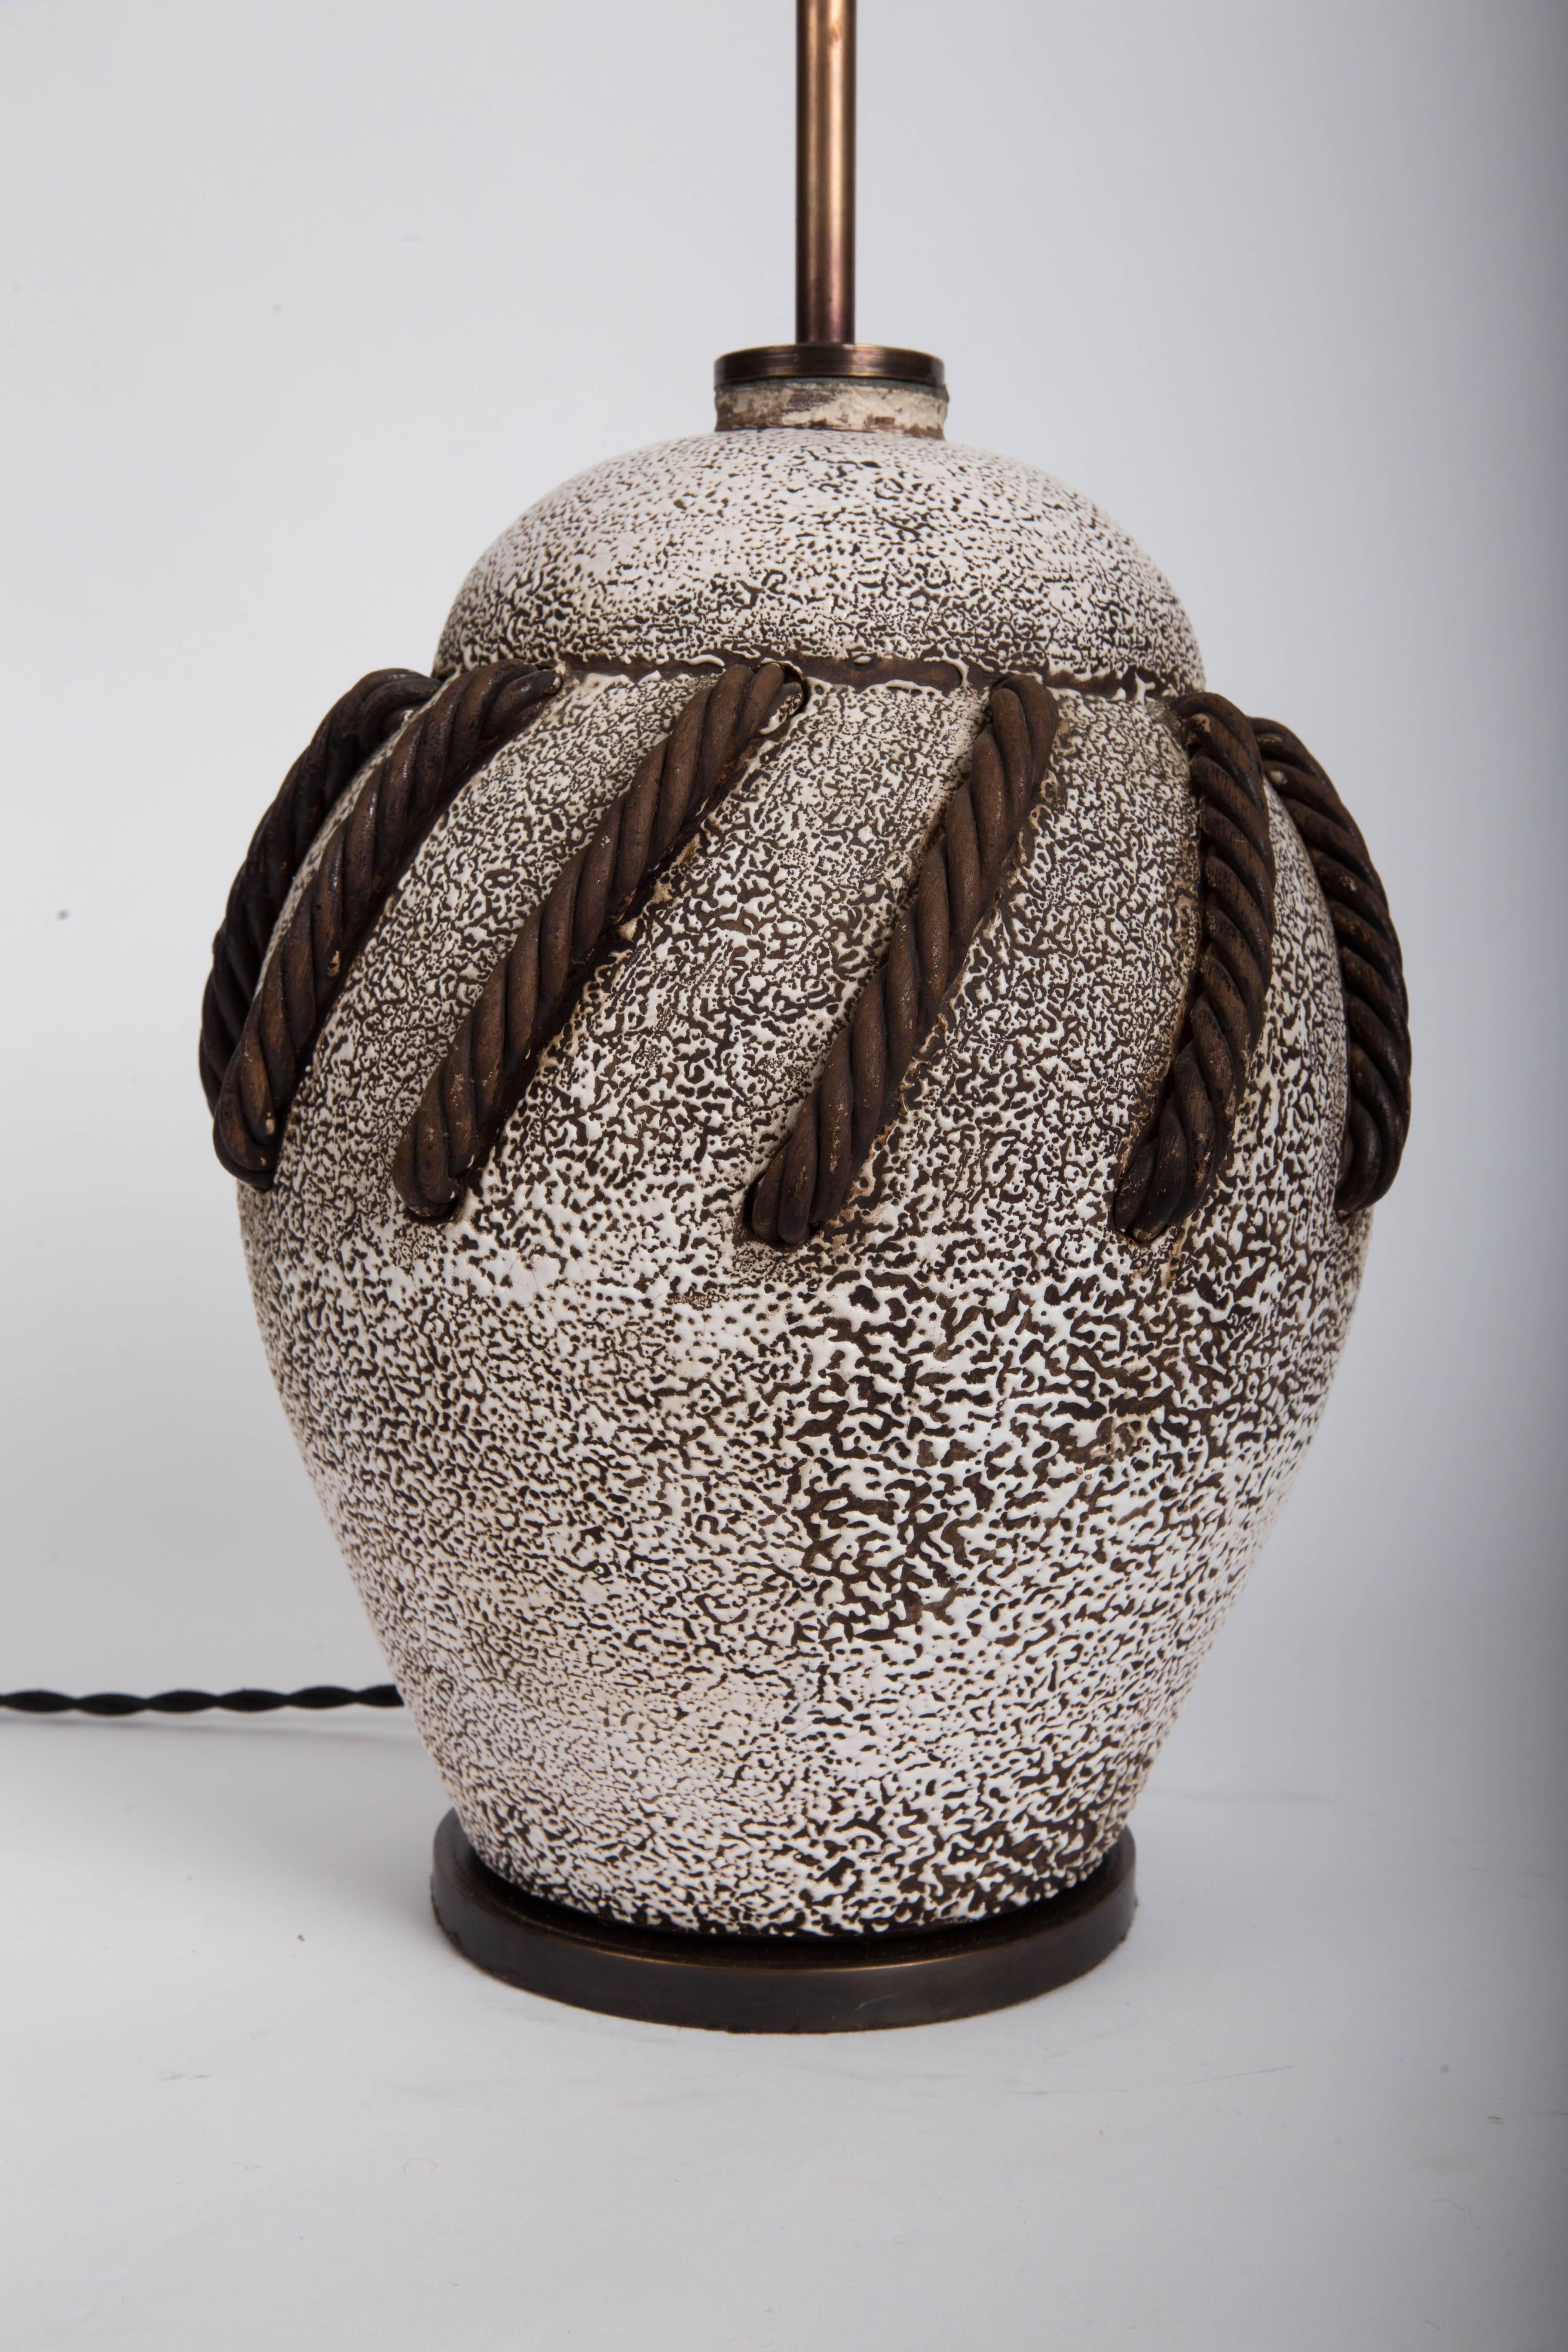 Textured Brown + White Ceramic Lamp with Rope Detailing 7